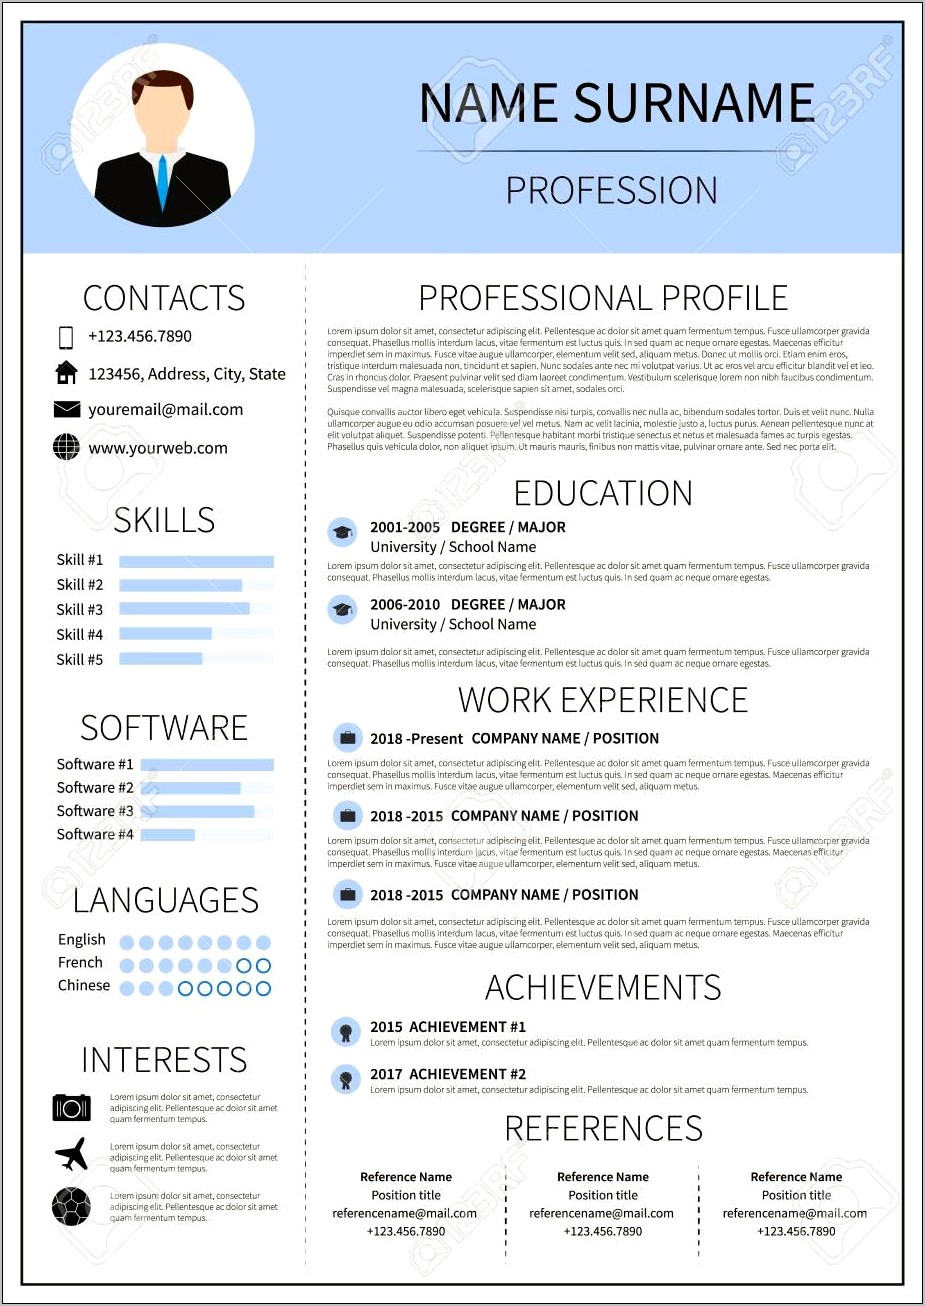 Infographic Resume Vol 1 Free Download